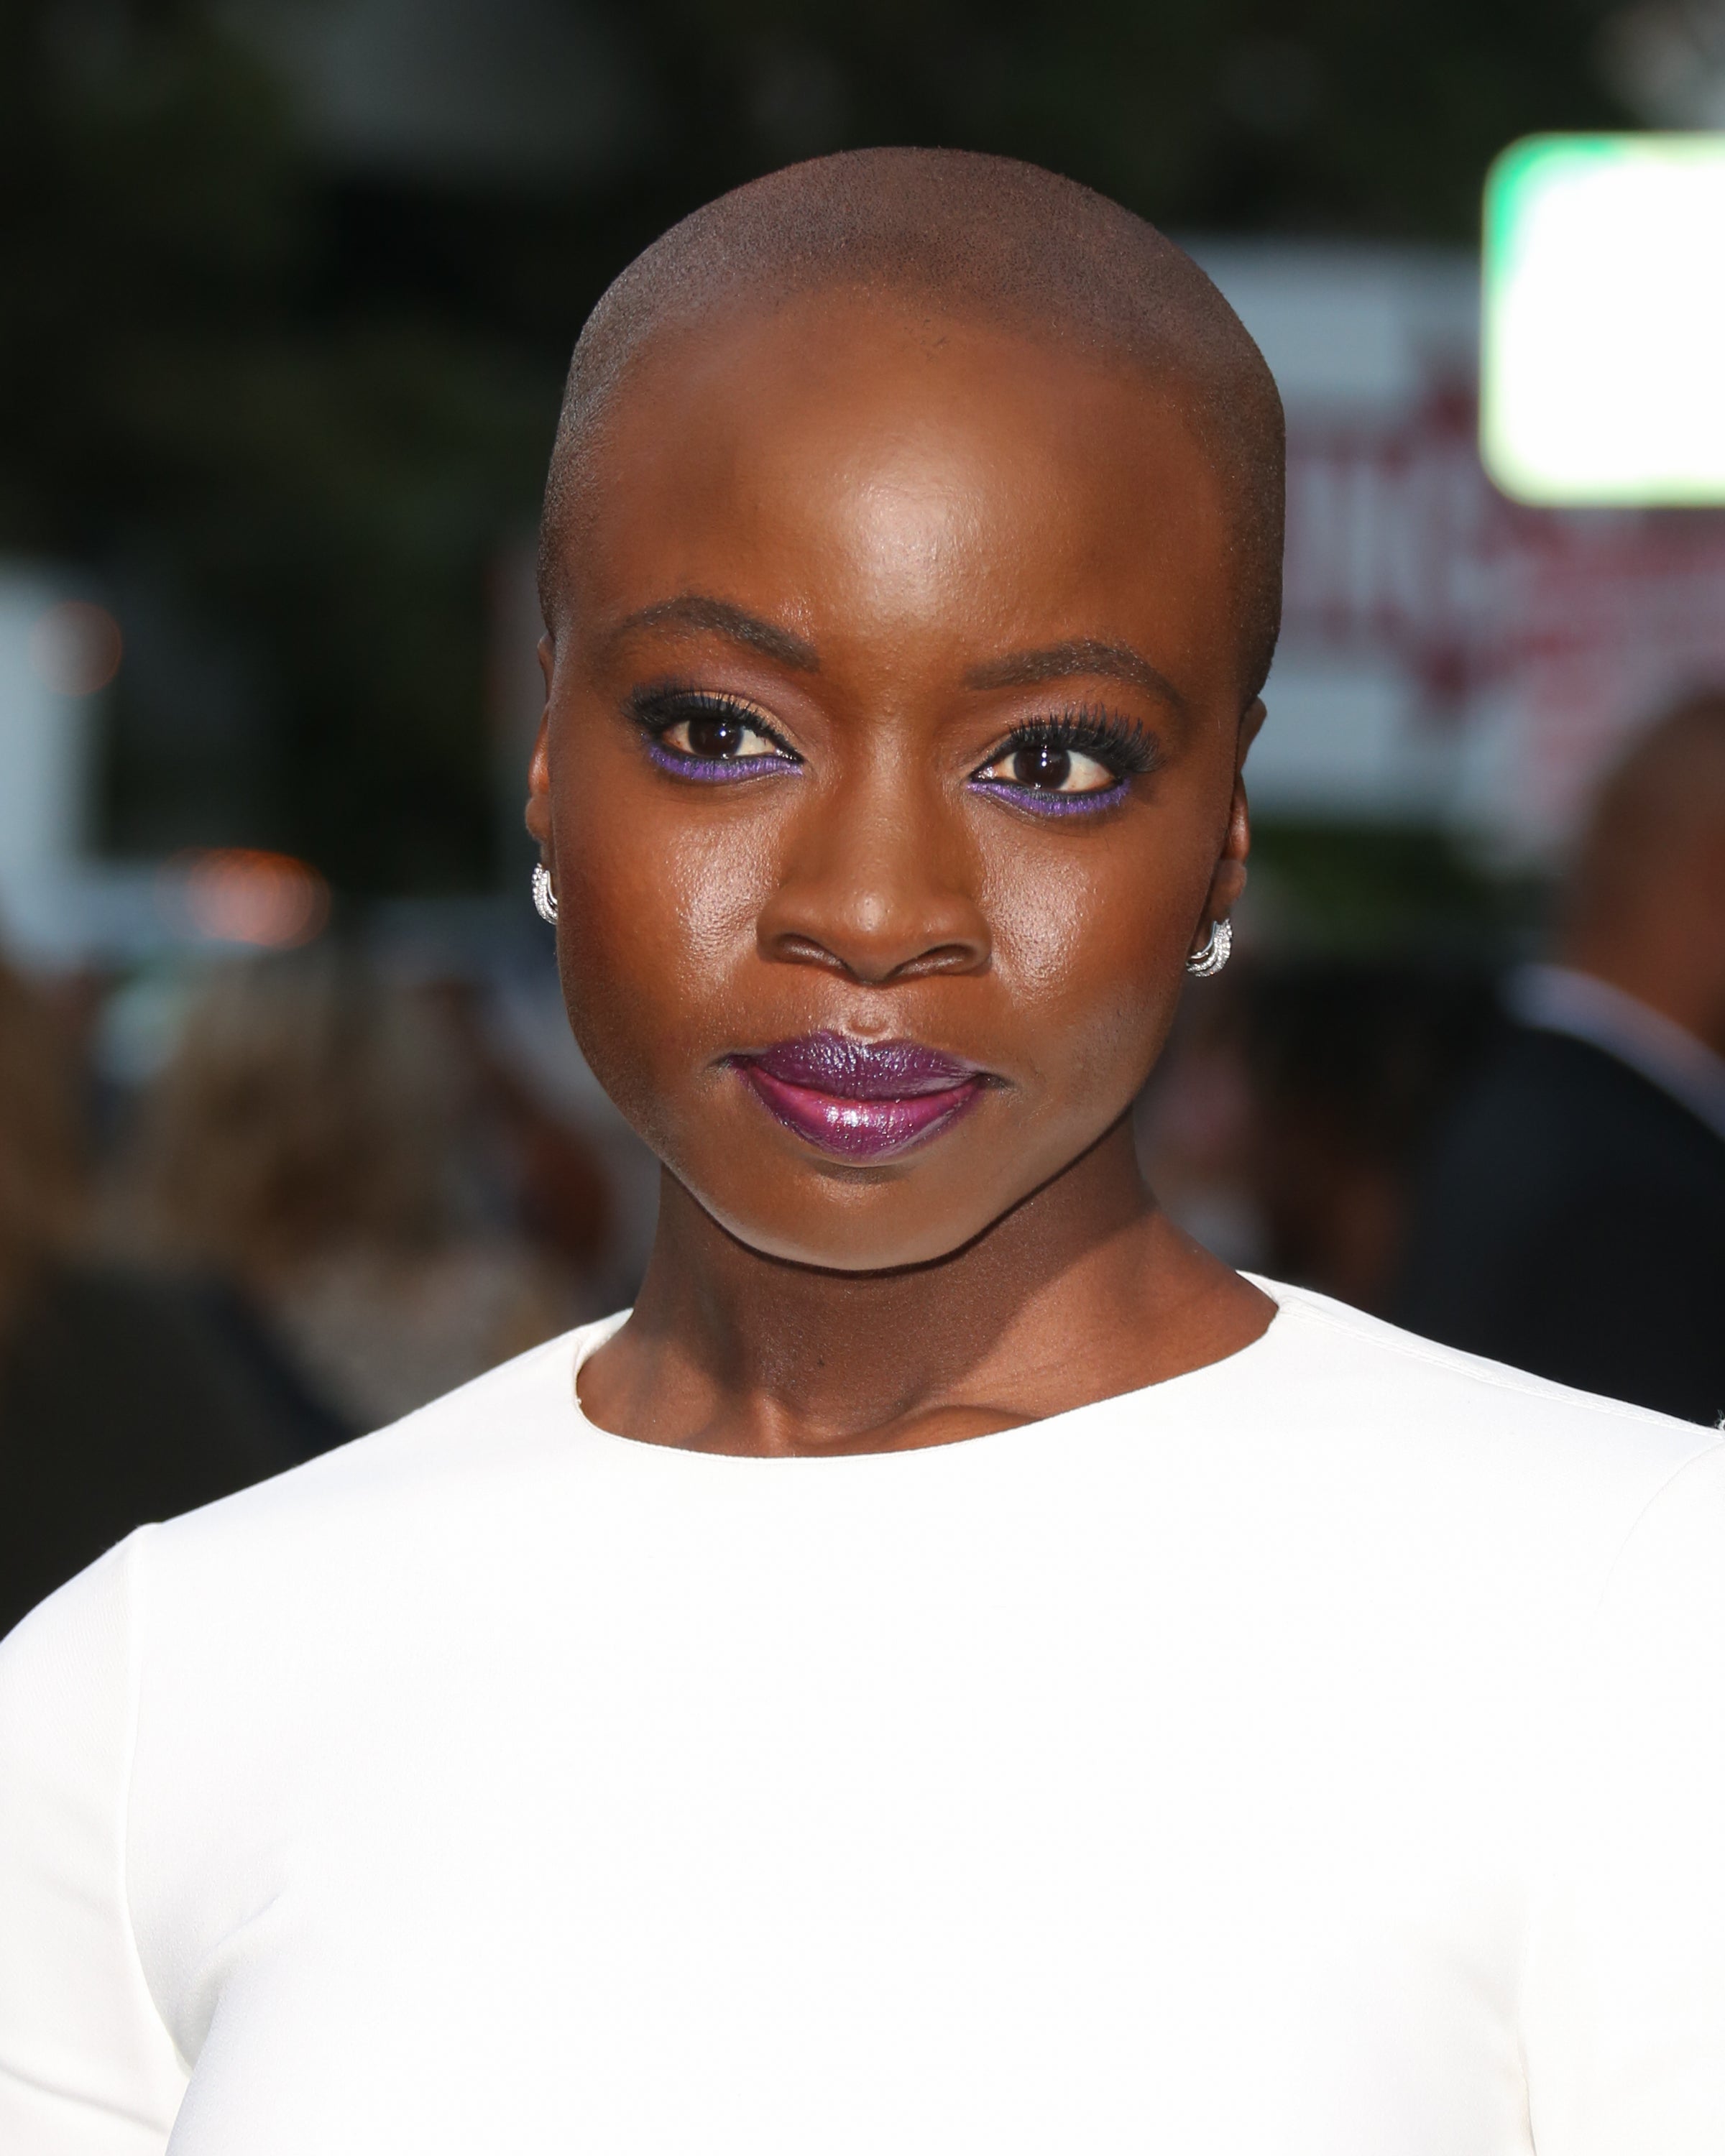 Danai Gurira Wore The Coolest Liner Look to 'All Eyez On Me' World Premiere
